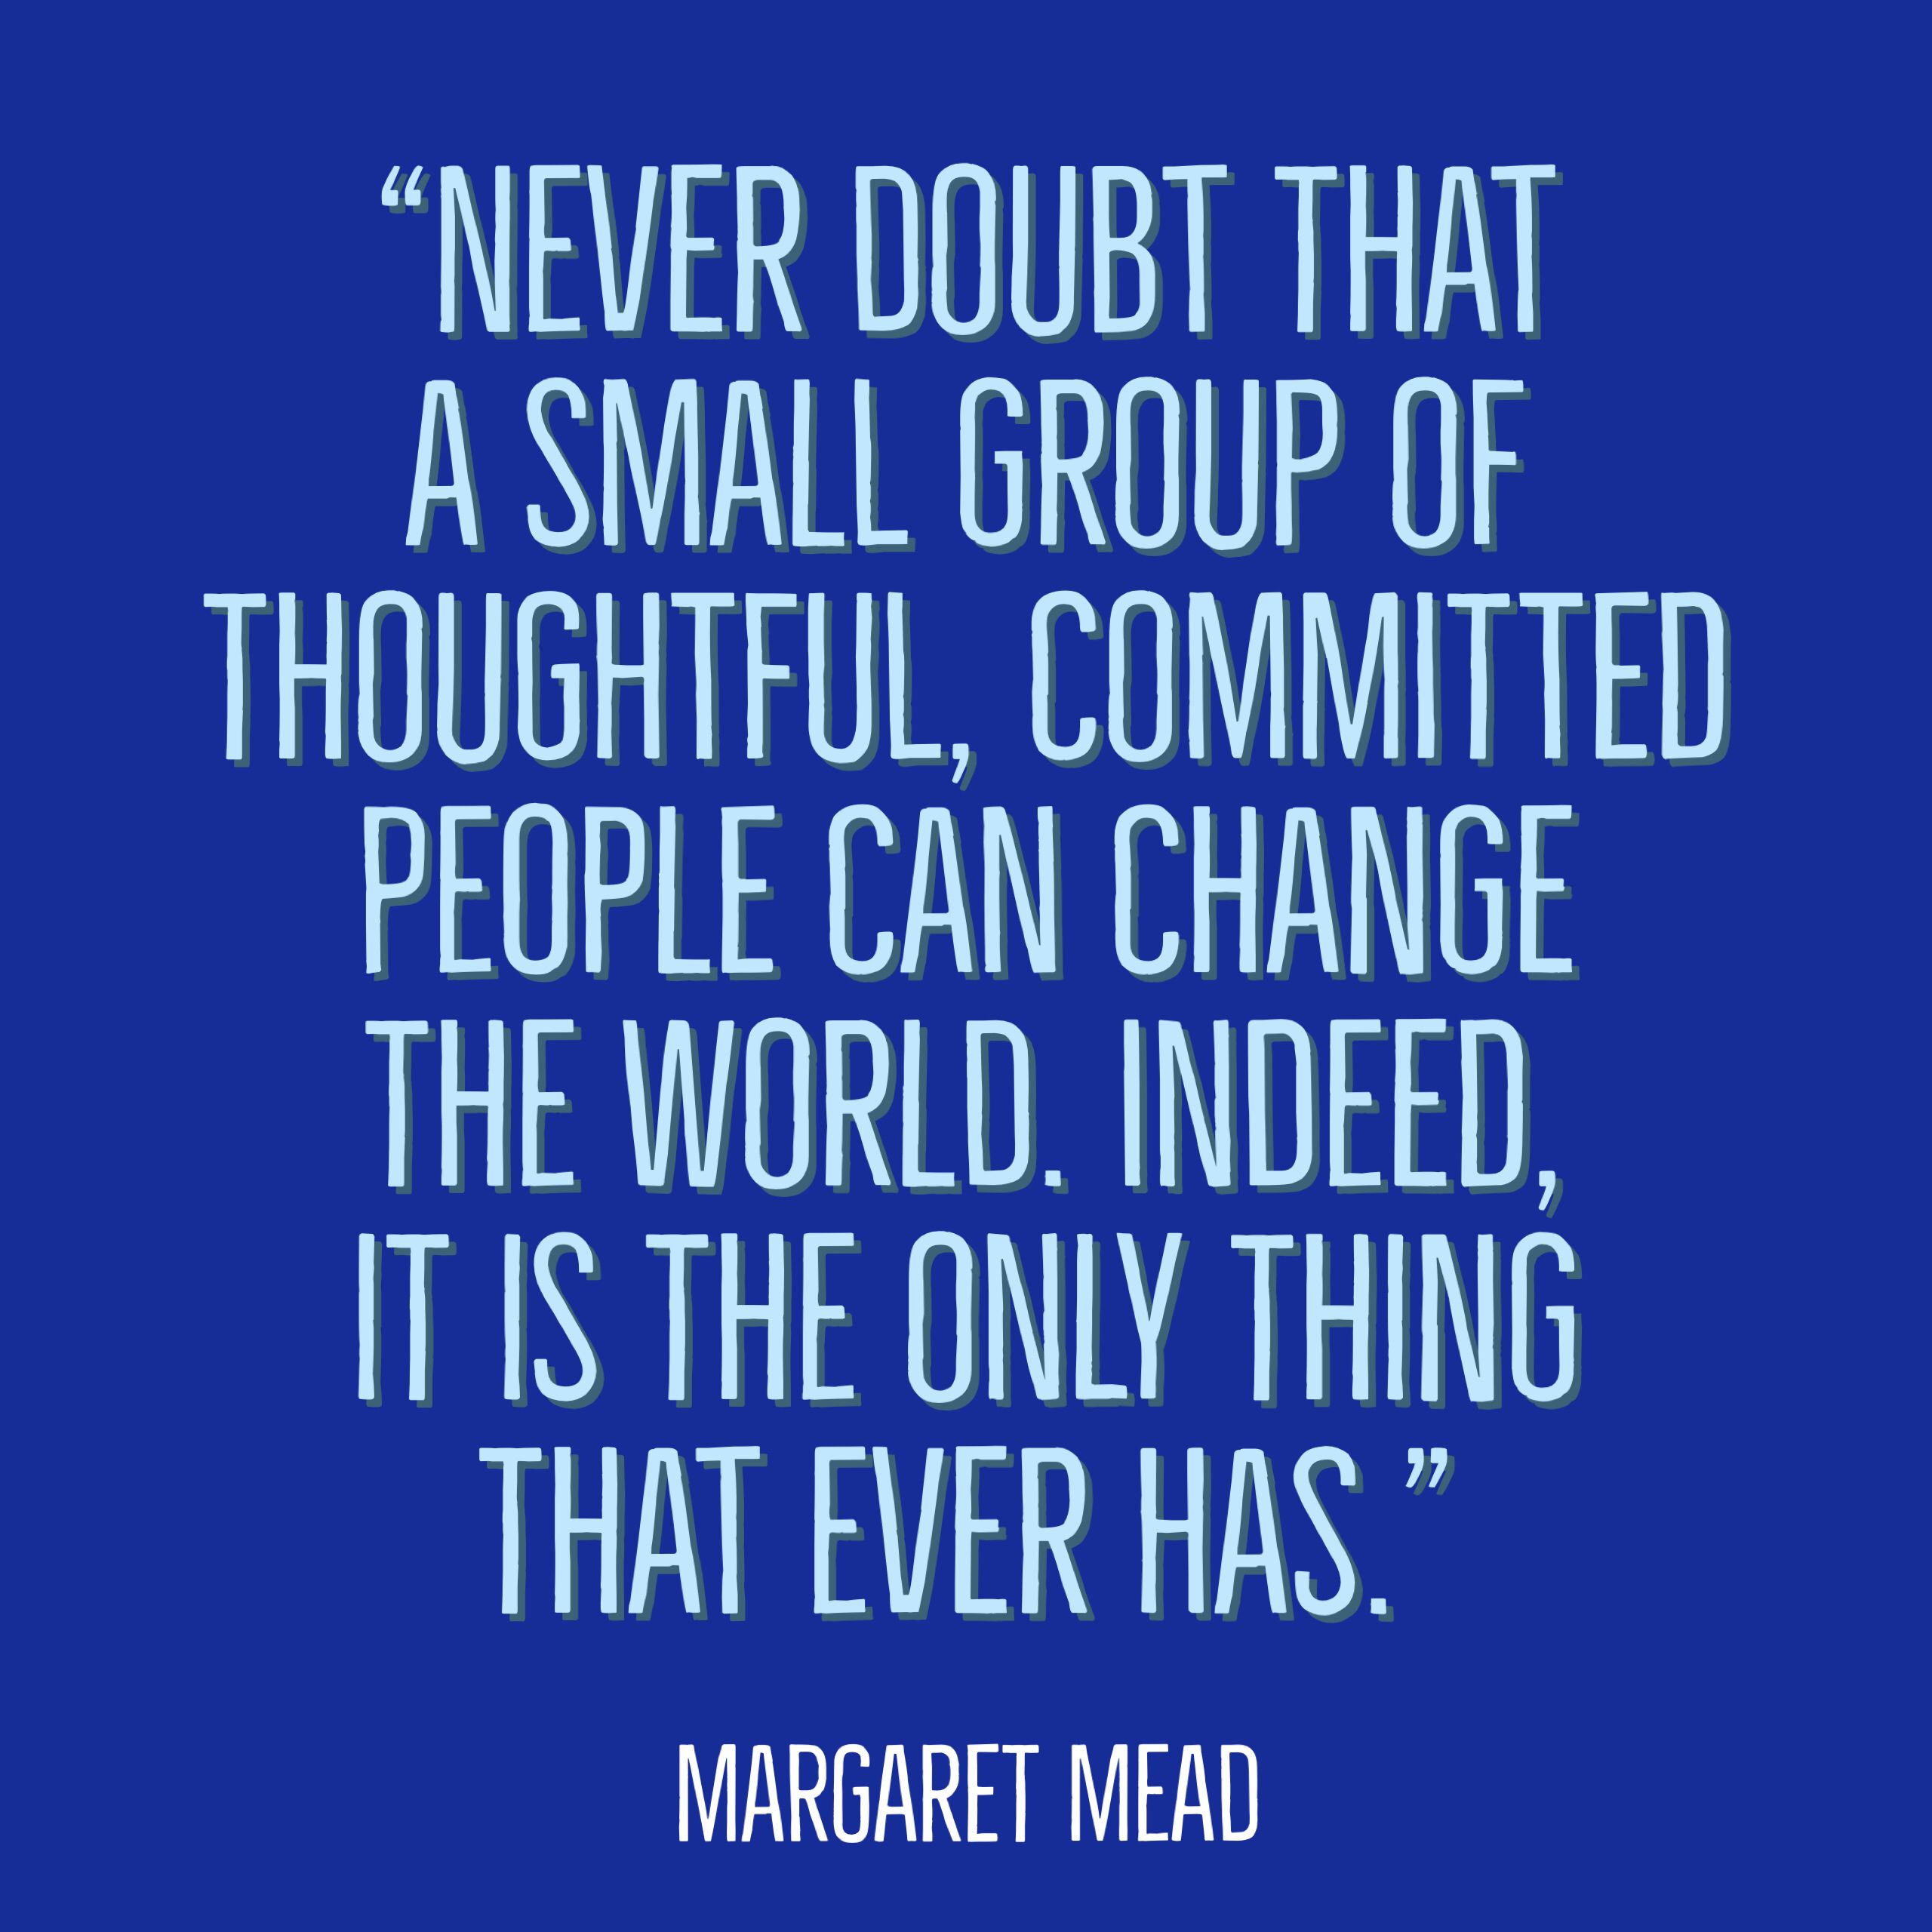 SixDegrees a Twitteren: &quot;“Never doubt that a small group of thoughtful,  committed people can change the world. Indeed, it is the only thing that  ever has.” — Margaret Mead Never forget that